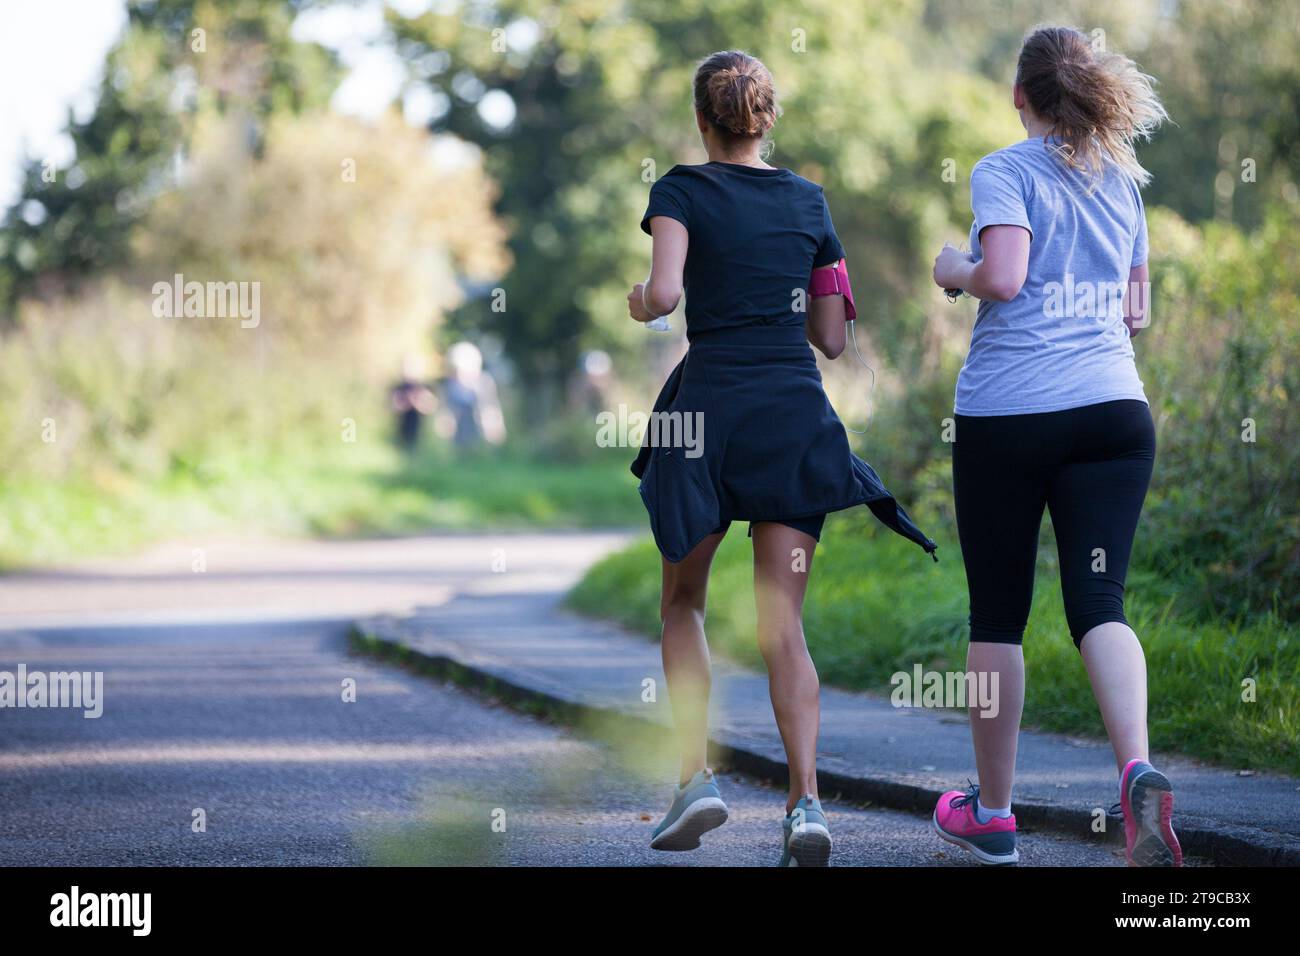 two female runners, jogging on a sunny day in leafy setting Stock Photo